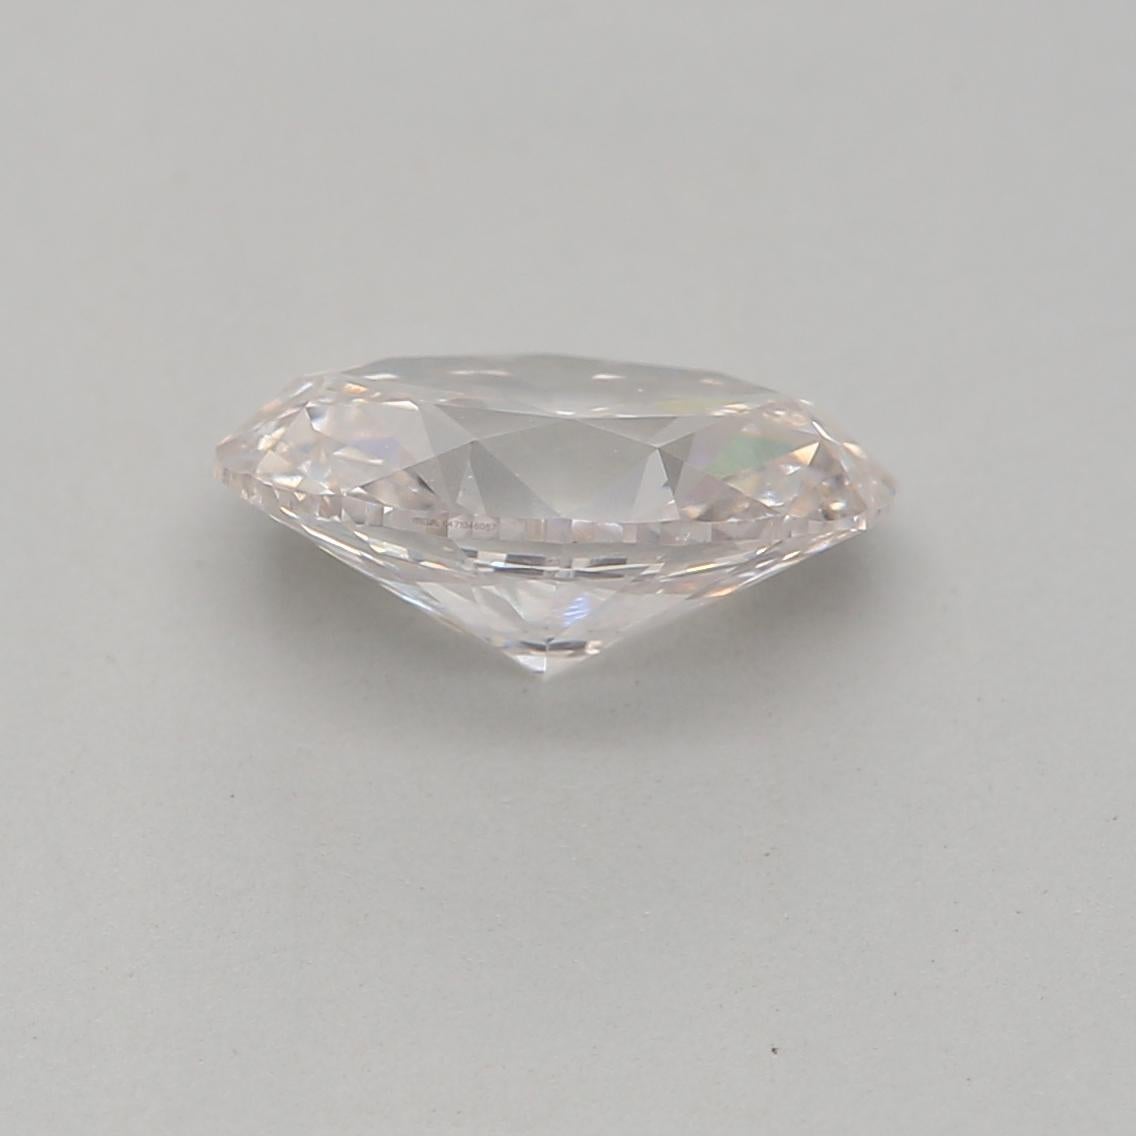 0.70 Carat Very Light Pink Oval Cut Diamond SI1 Clarity GIA Certified For Sale 1